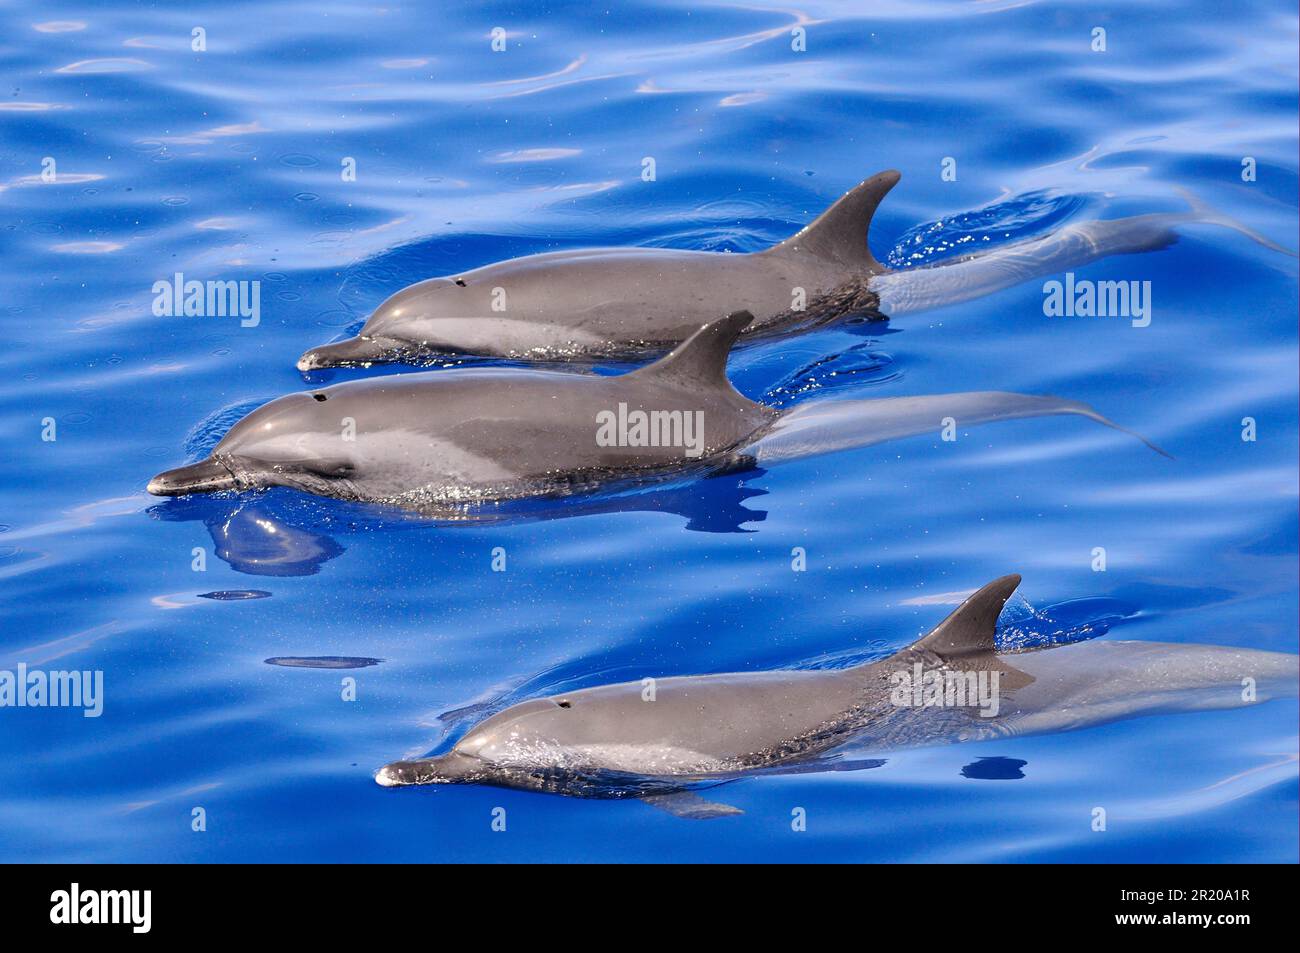 Pantropical Spotted Dolphin (Stenella attenuata) three adults, swimming at surface of water, Maldives Stock Photo